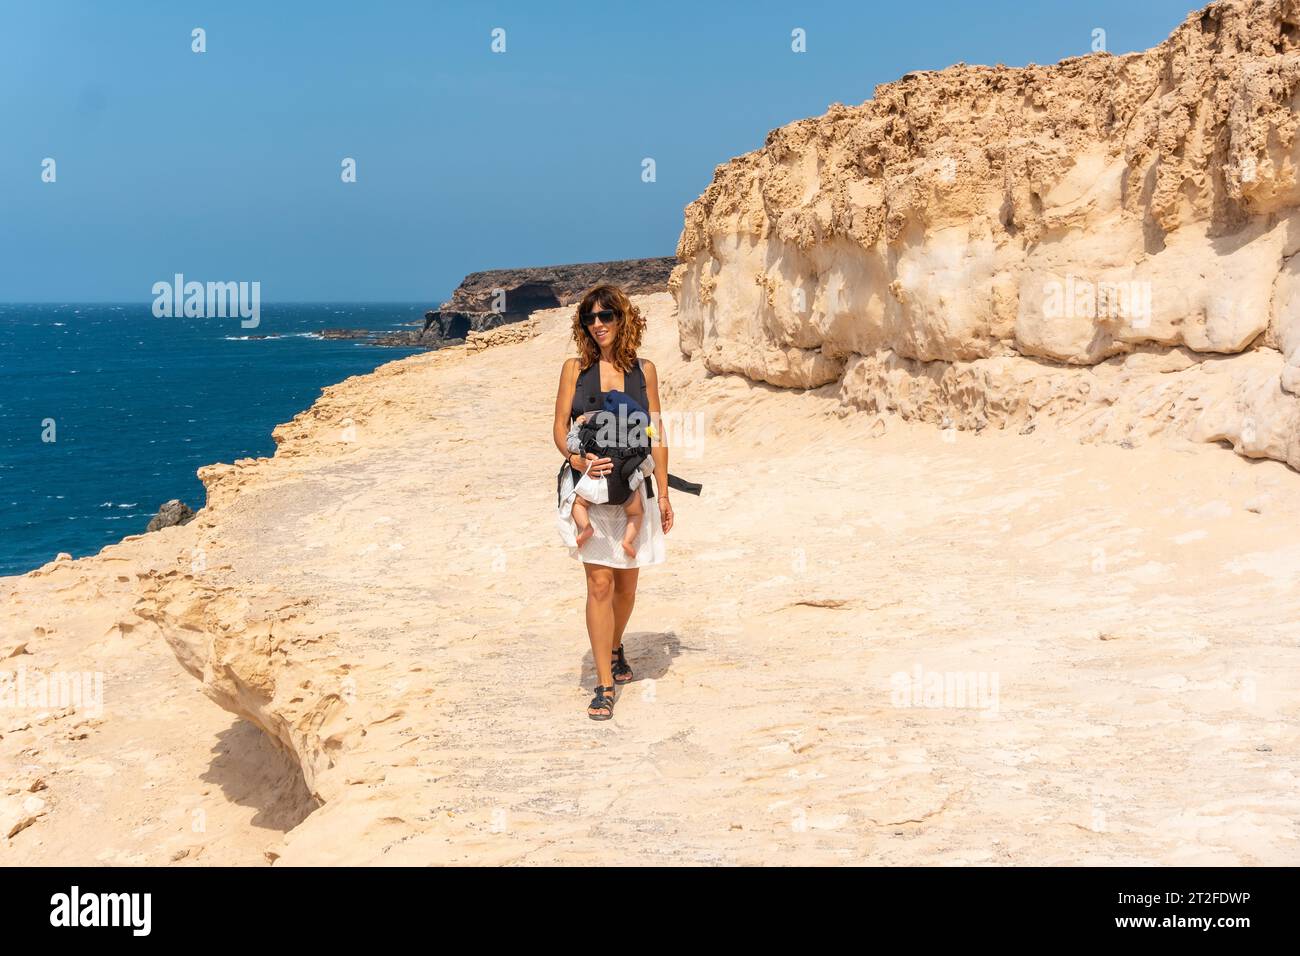 A young mother with her son walking on the path in the Cuevas de Ajuy, Pajara, west coast of the island of Fuerteventura, Canary Islands. Spain Stock Photo